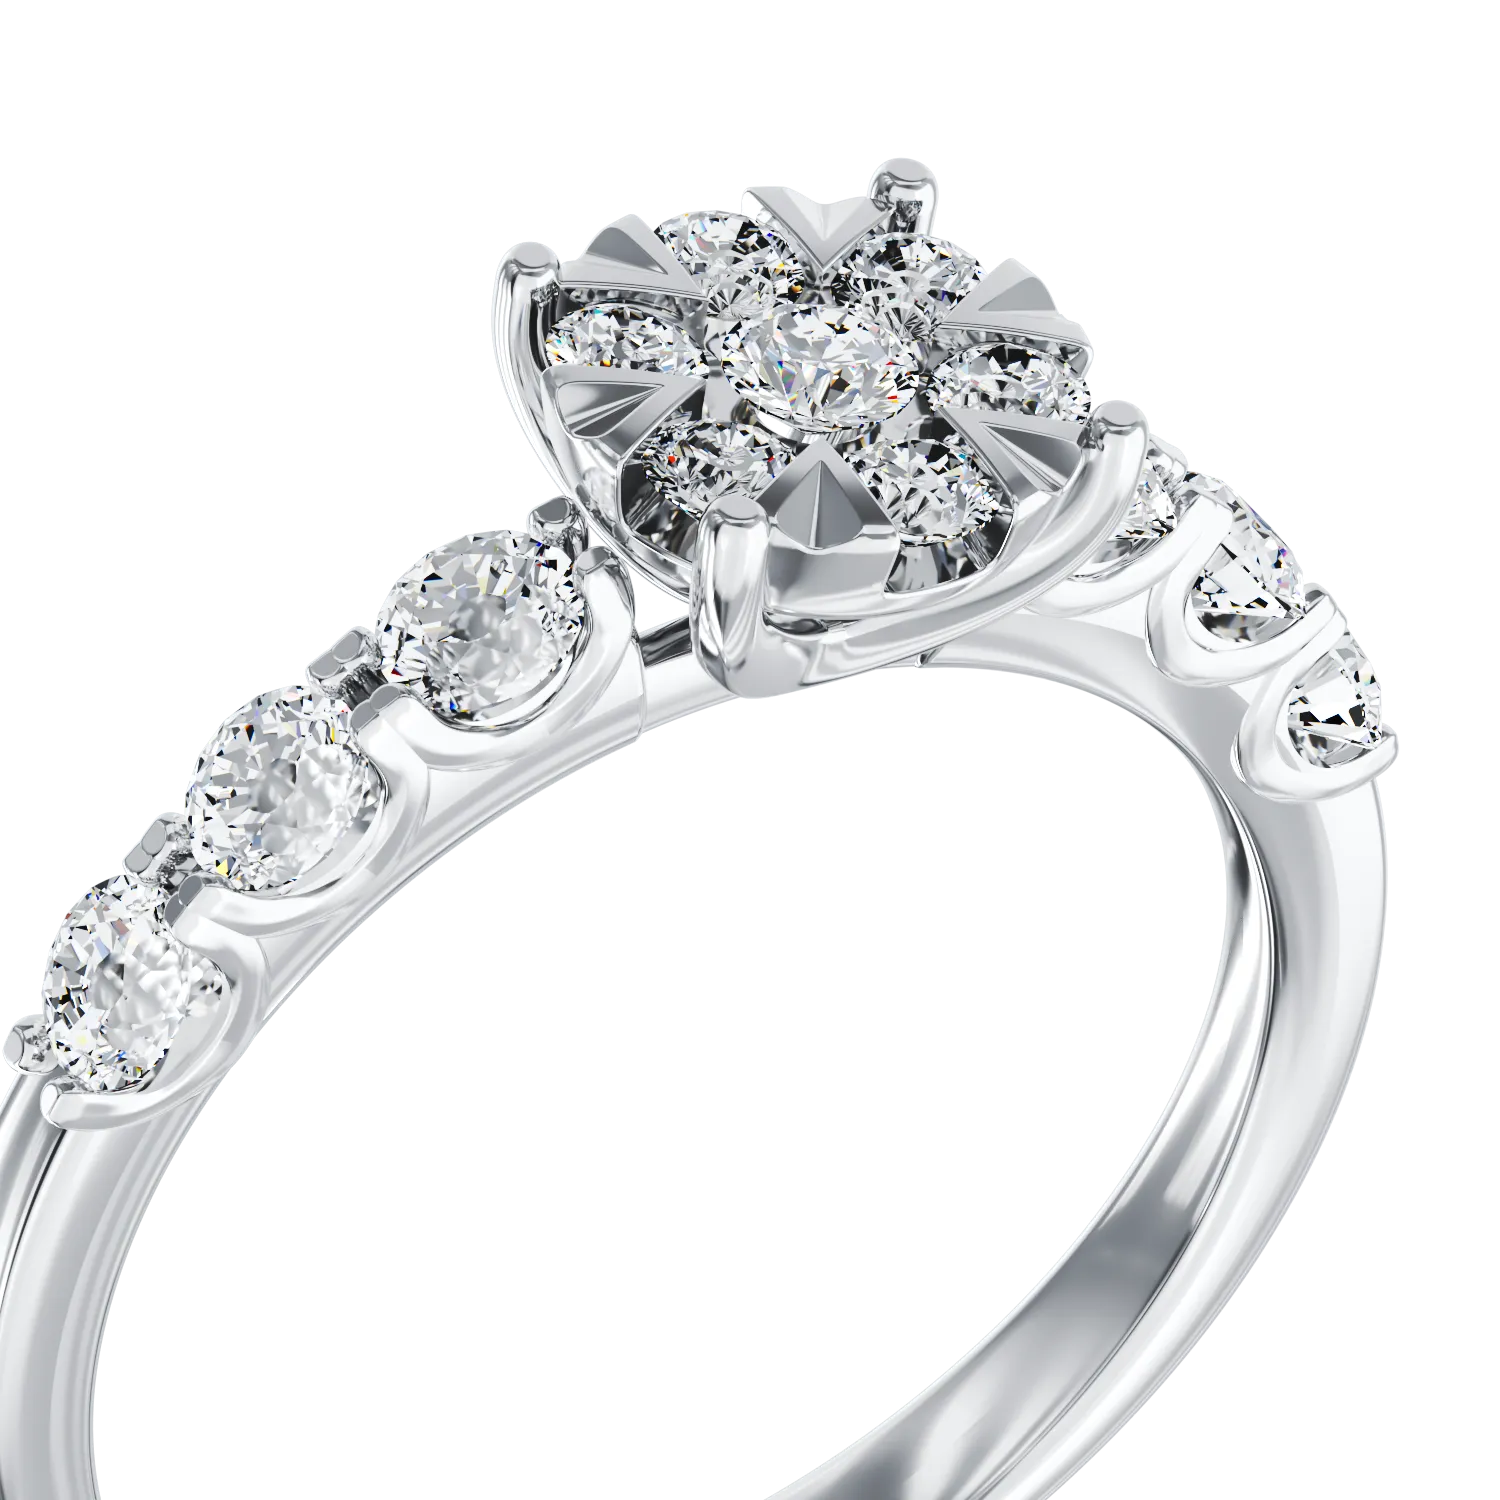 18k white gold engagement ring with 0.84ct diamonds